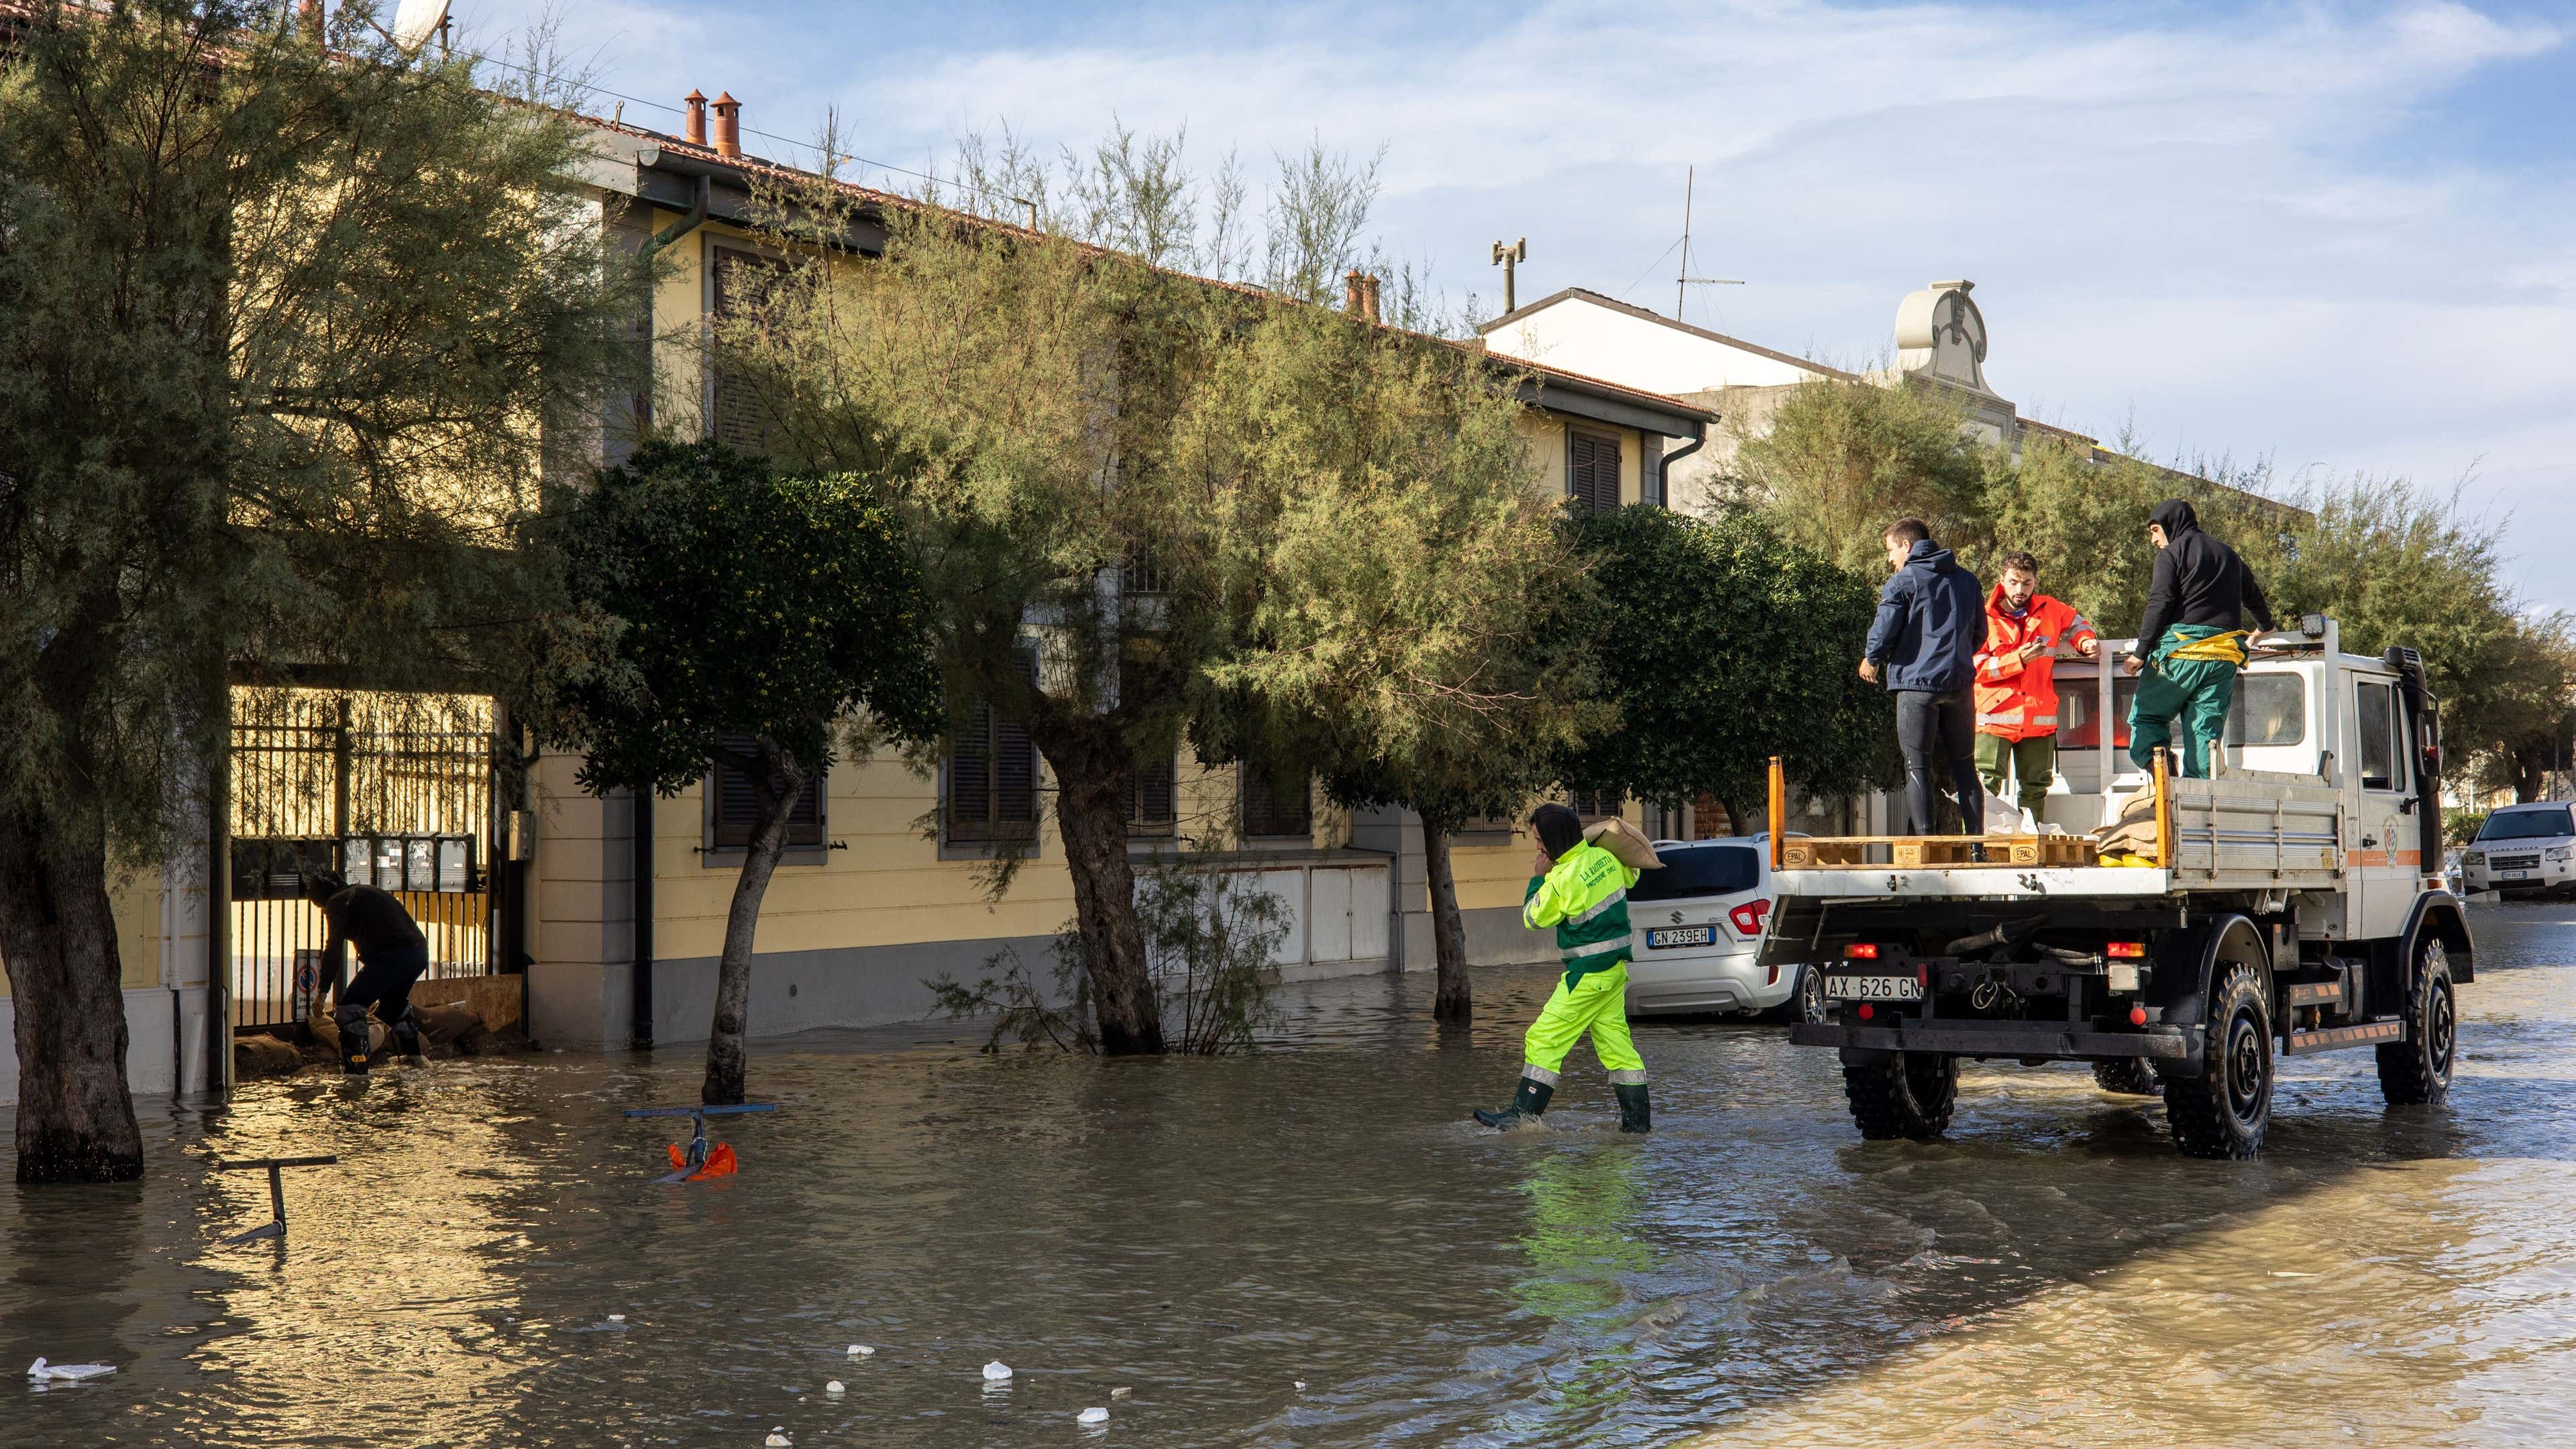 Our city is completely on its knees'- Fiorentina fans demand Serie A clash  with Juventus be postponed amid floods